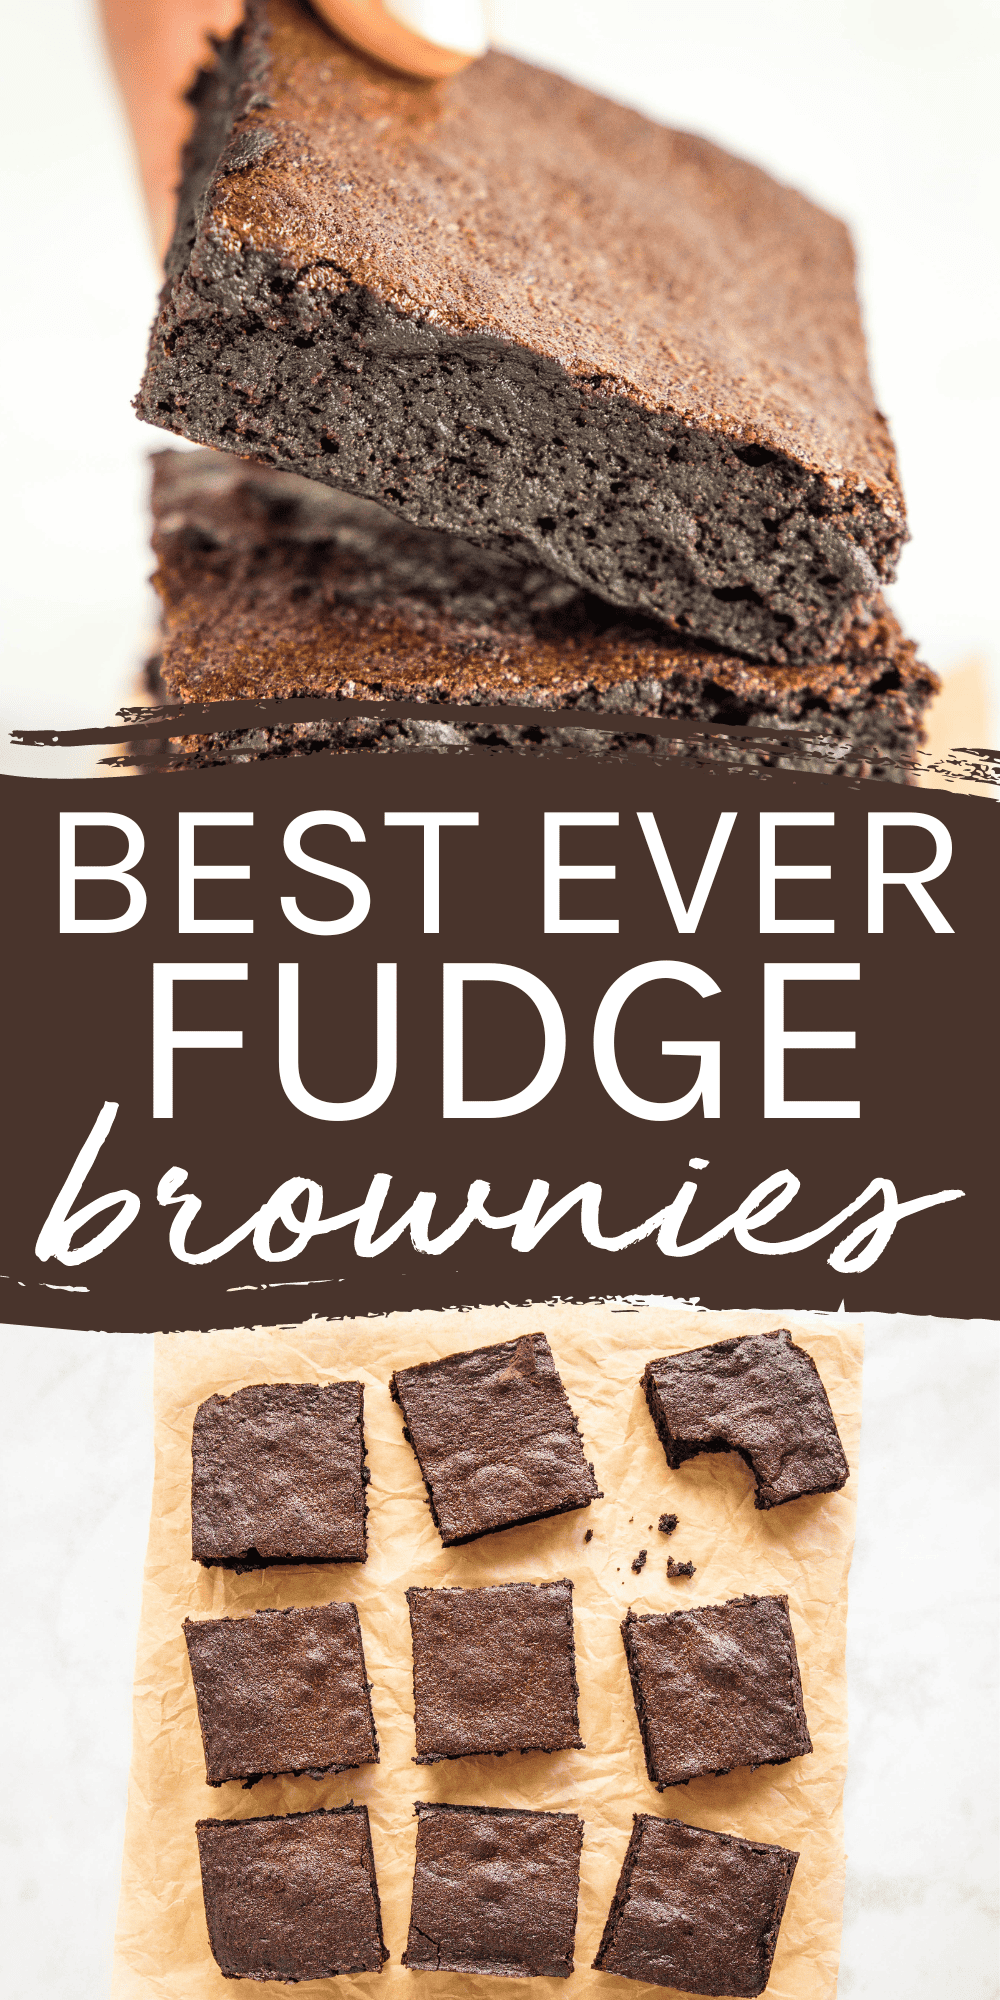 This Easy Brownies recipe makes the BEST fudge brownies ever! Soft, moist, fudgey and super easy to make in one bowl. The perfect easy from-scratch brownie recipe - you'll never make brownies from a box again! Recipe from thebusybaker.ca! #bestbrownierecipe #brownies #easybrownies #fudgeybrownies #easybrownierecipe #browniesfromscratch #bestbrownies #howtomakebrownies via @busybakerblog